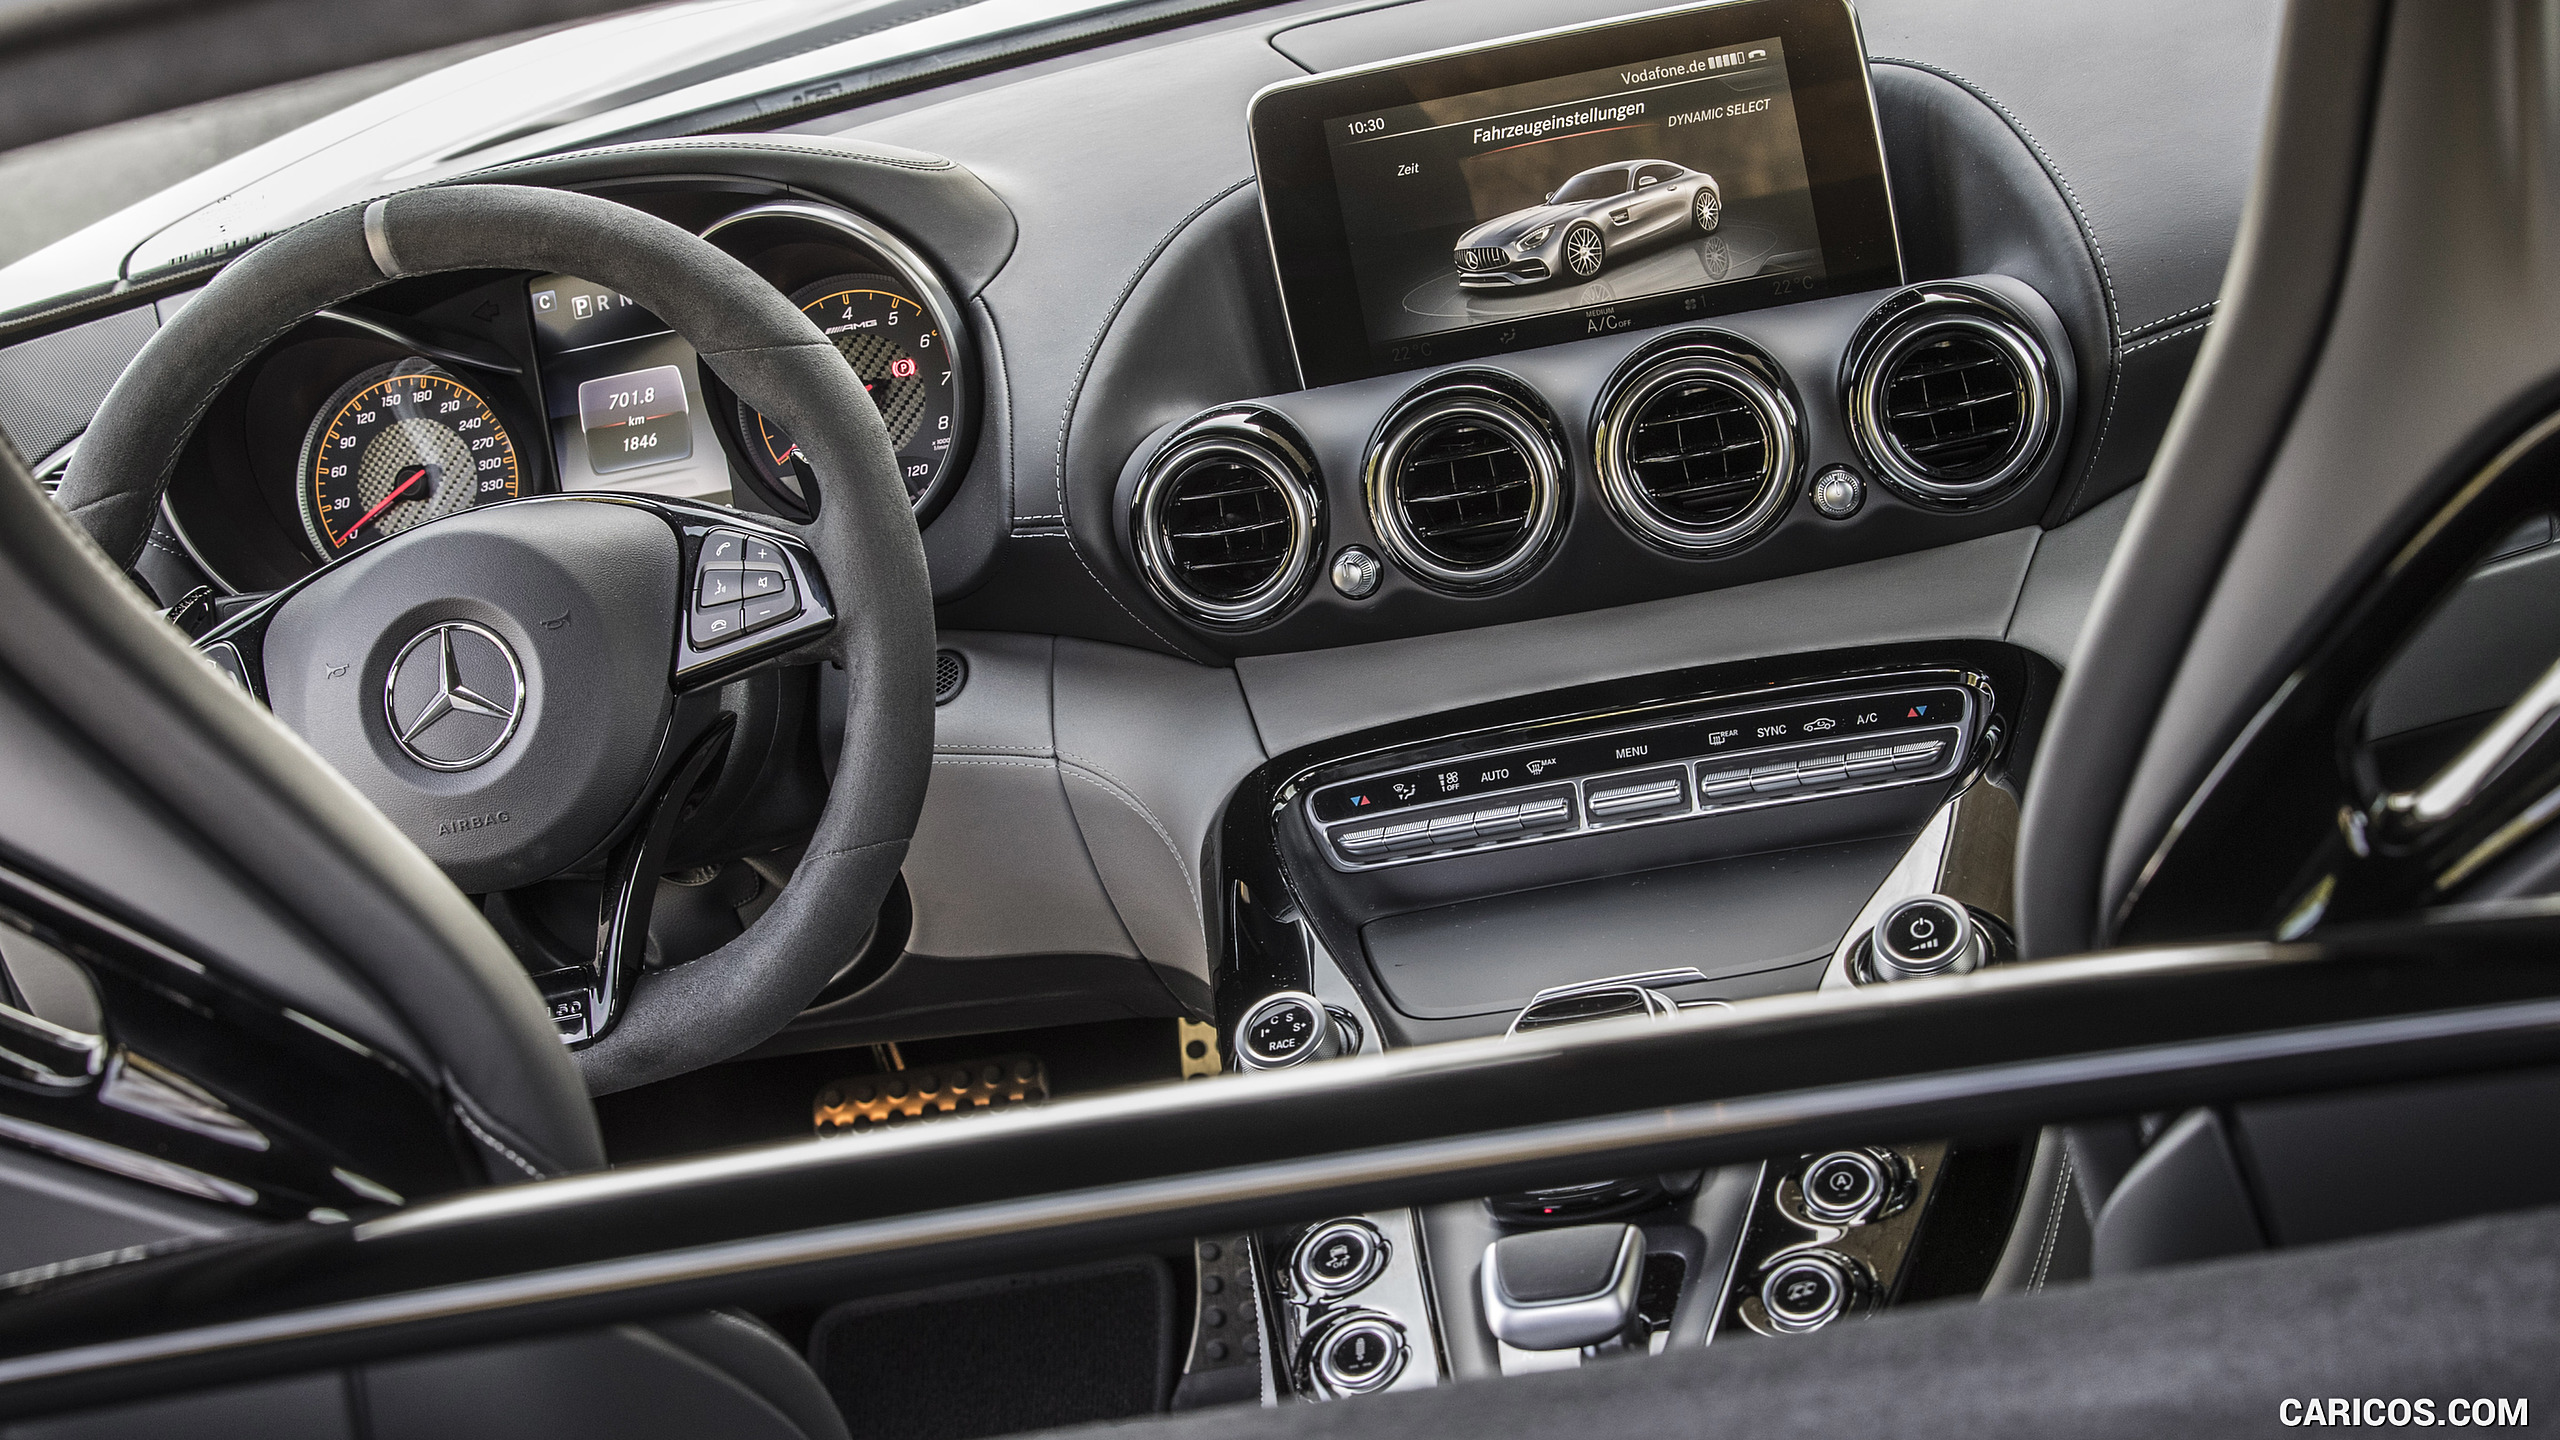 2018 Mercedes-AMG GT C Coupe Edition 50 - Interior, #63 of 70